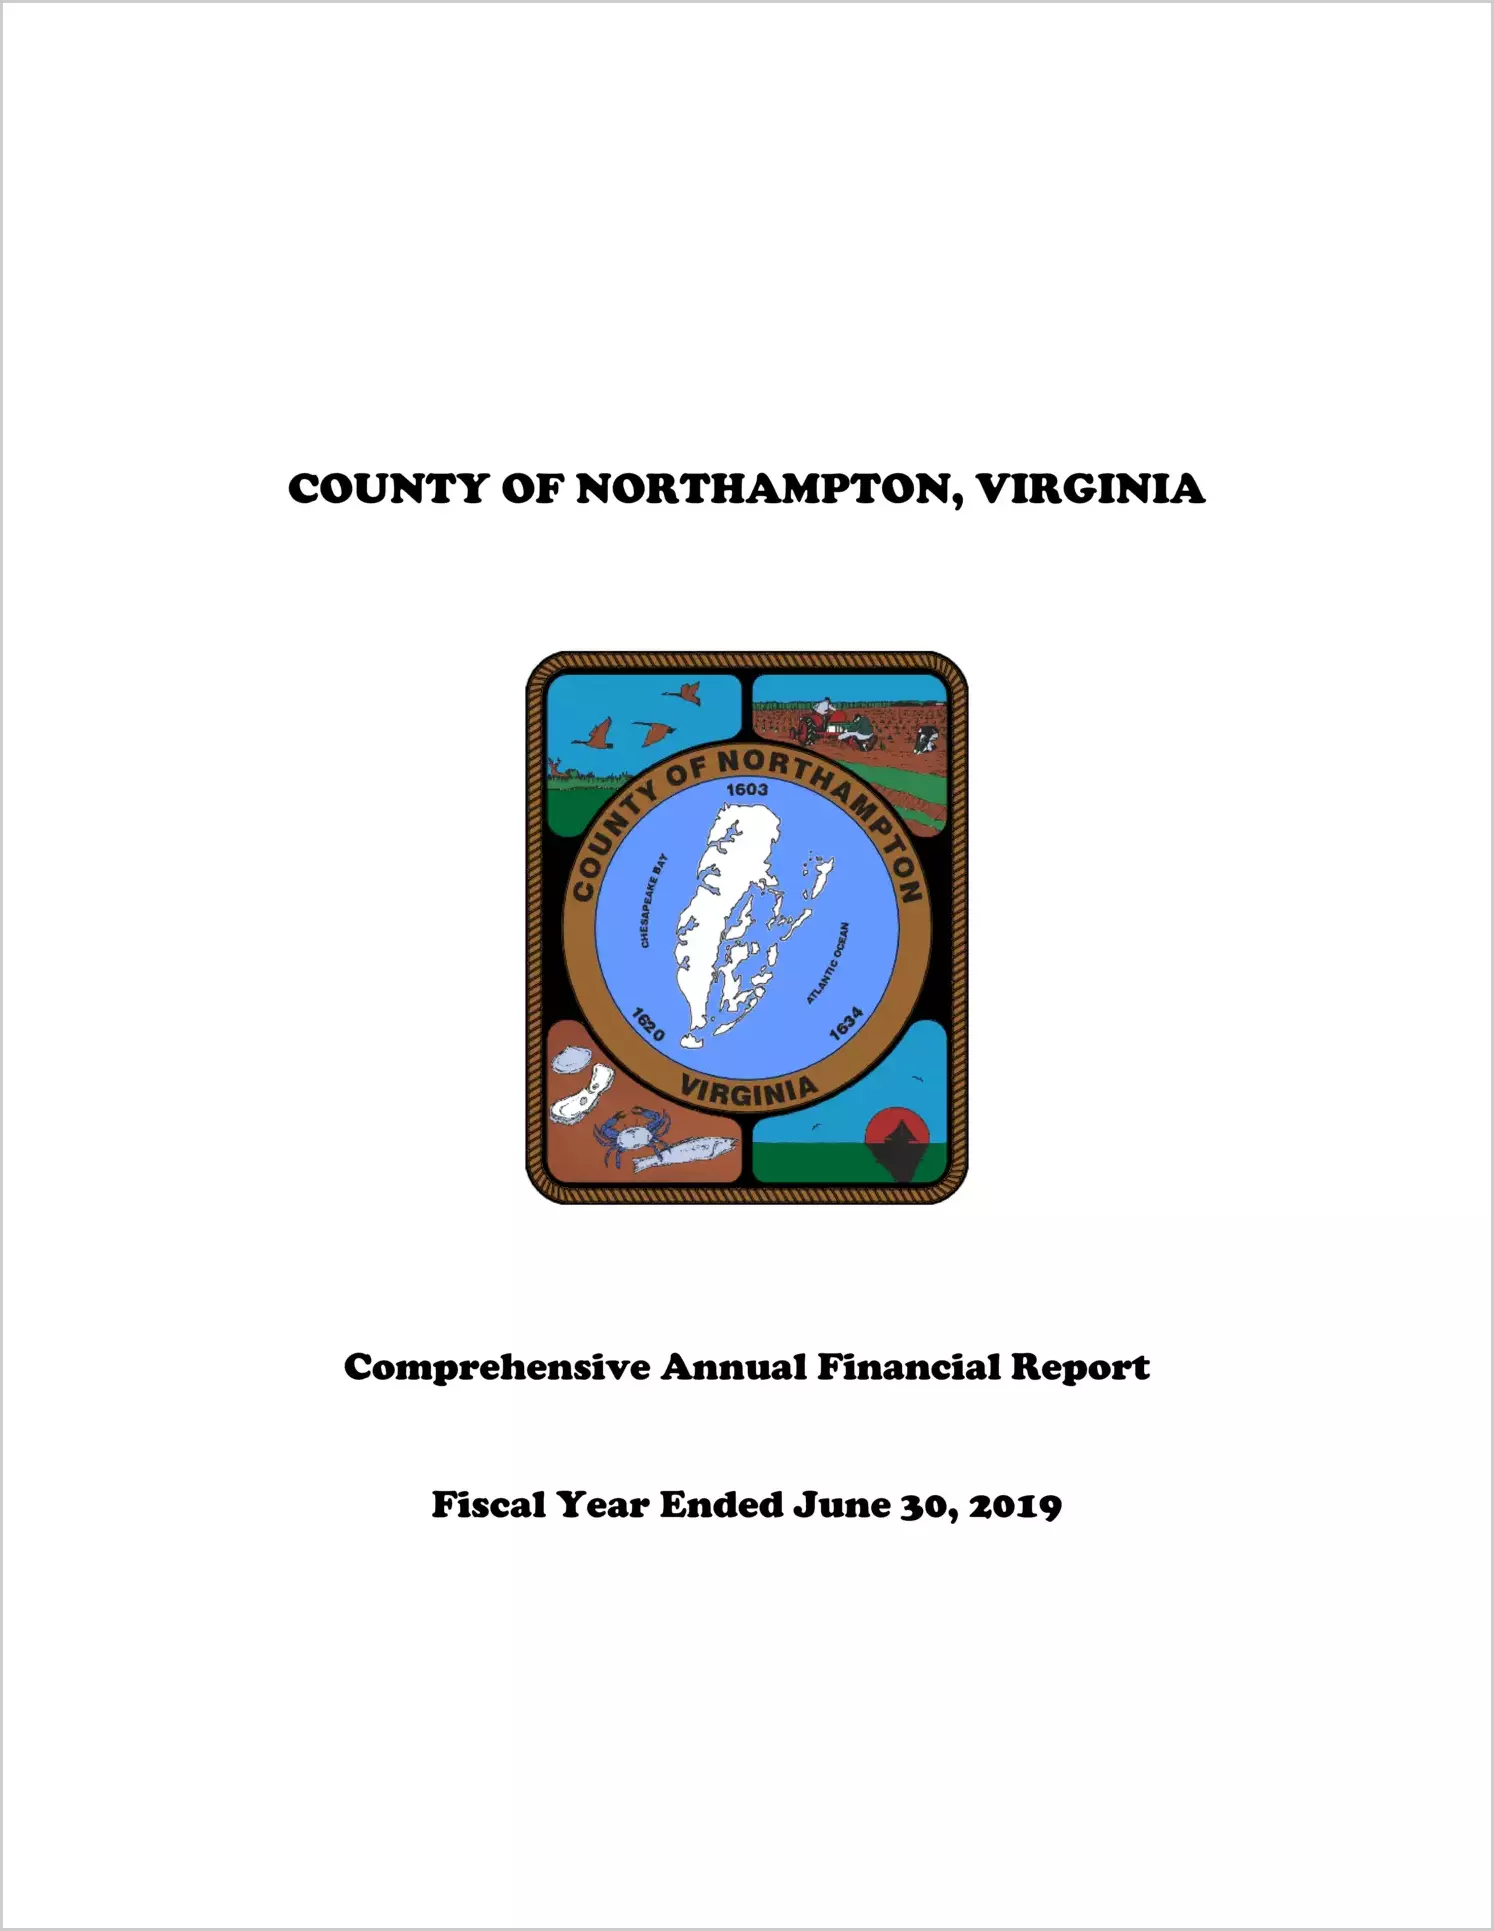 2019 Annual Financial Report for County of Northampton